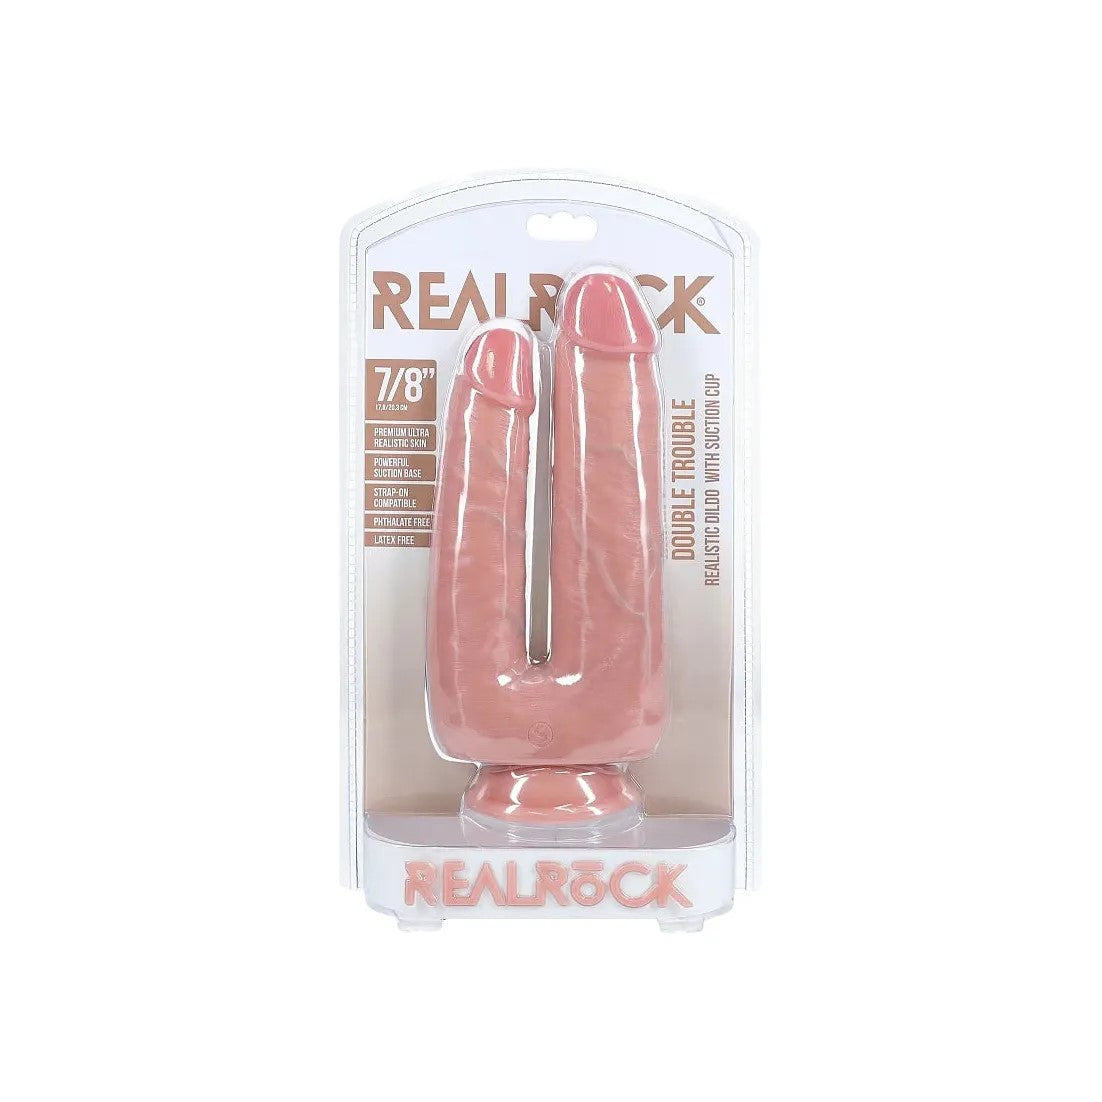 beige 7" & 8" double penetrator dildos with suction base in package